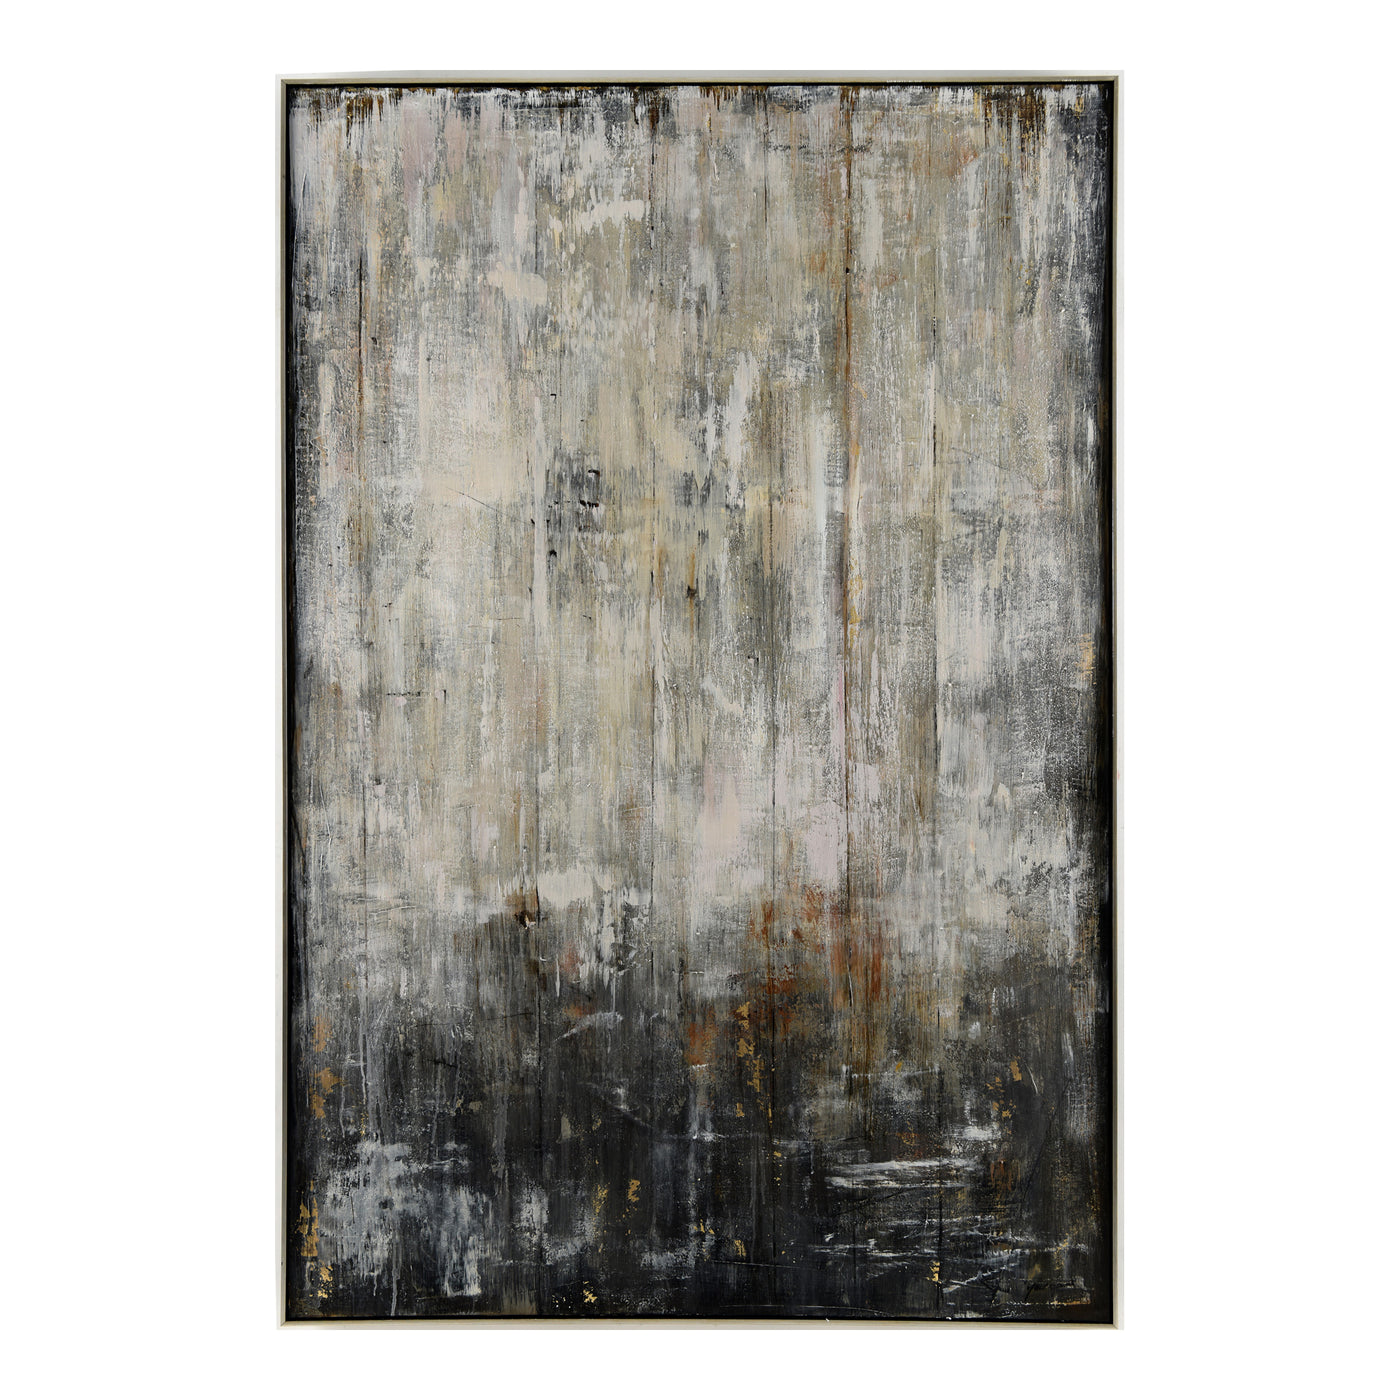 The Descent Wall decor is a brooding piece of abstract artwork. Perfect for balancing out a groomed room or for adding tex...